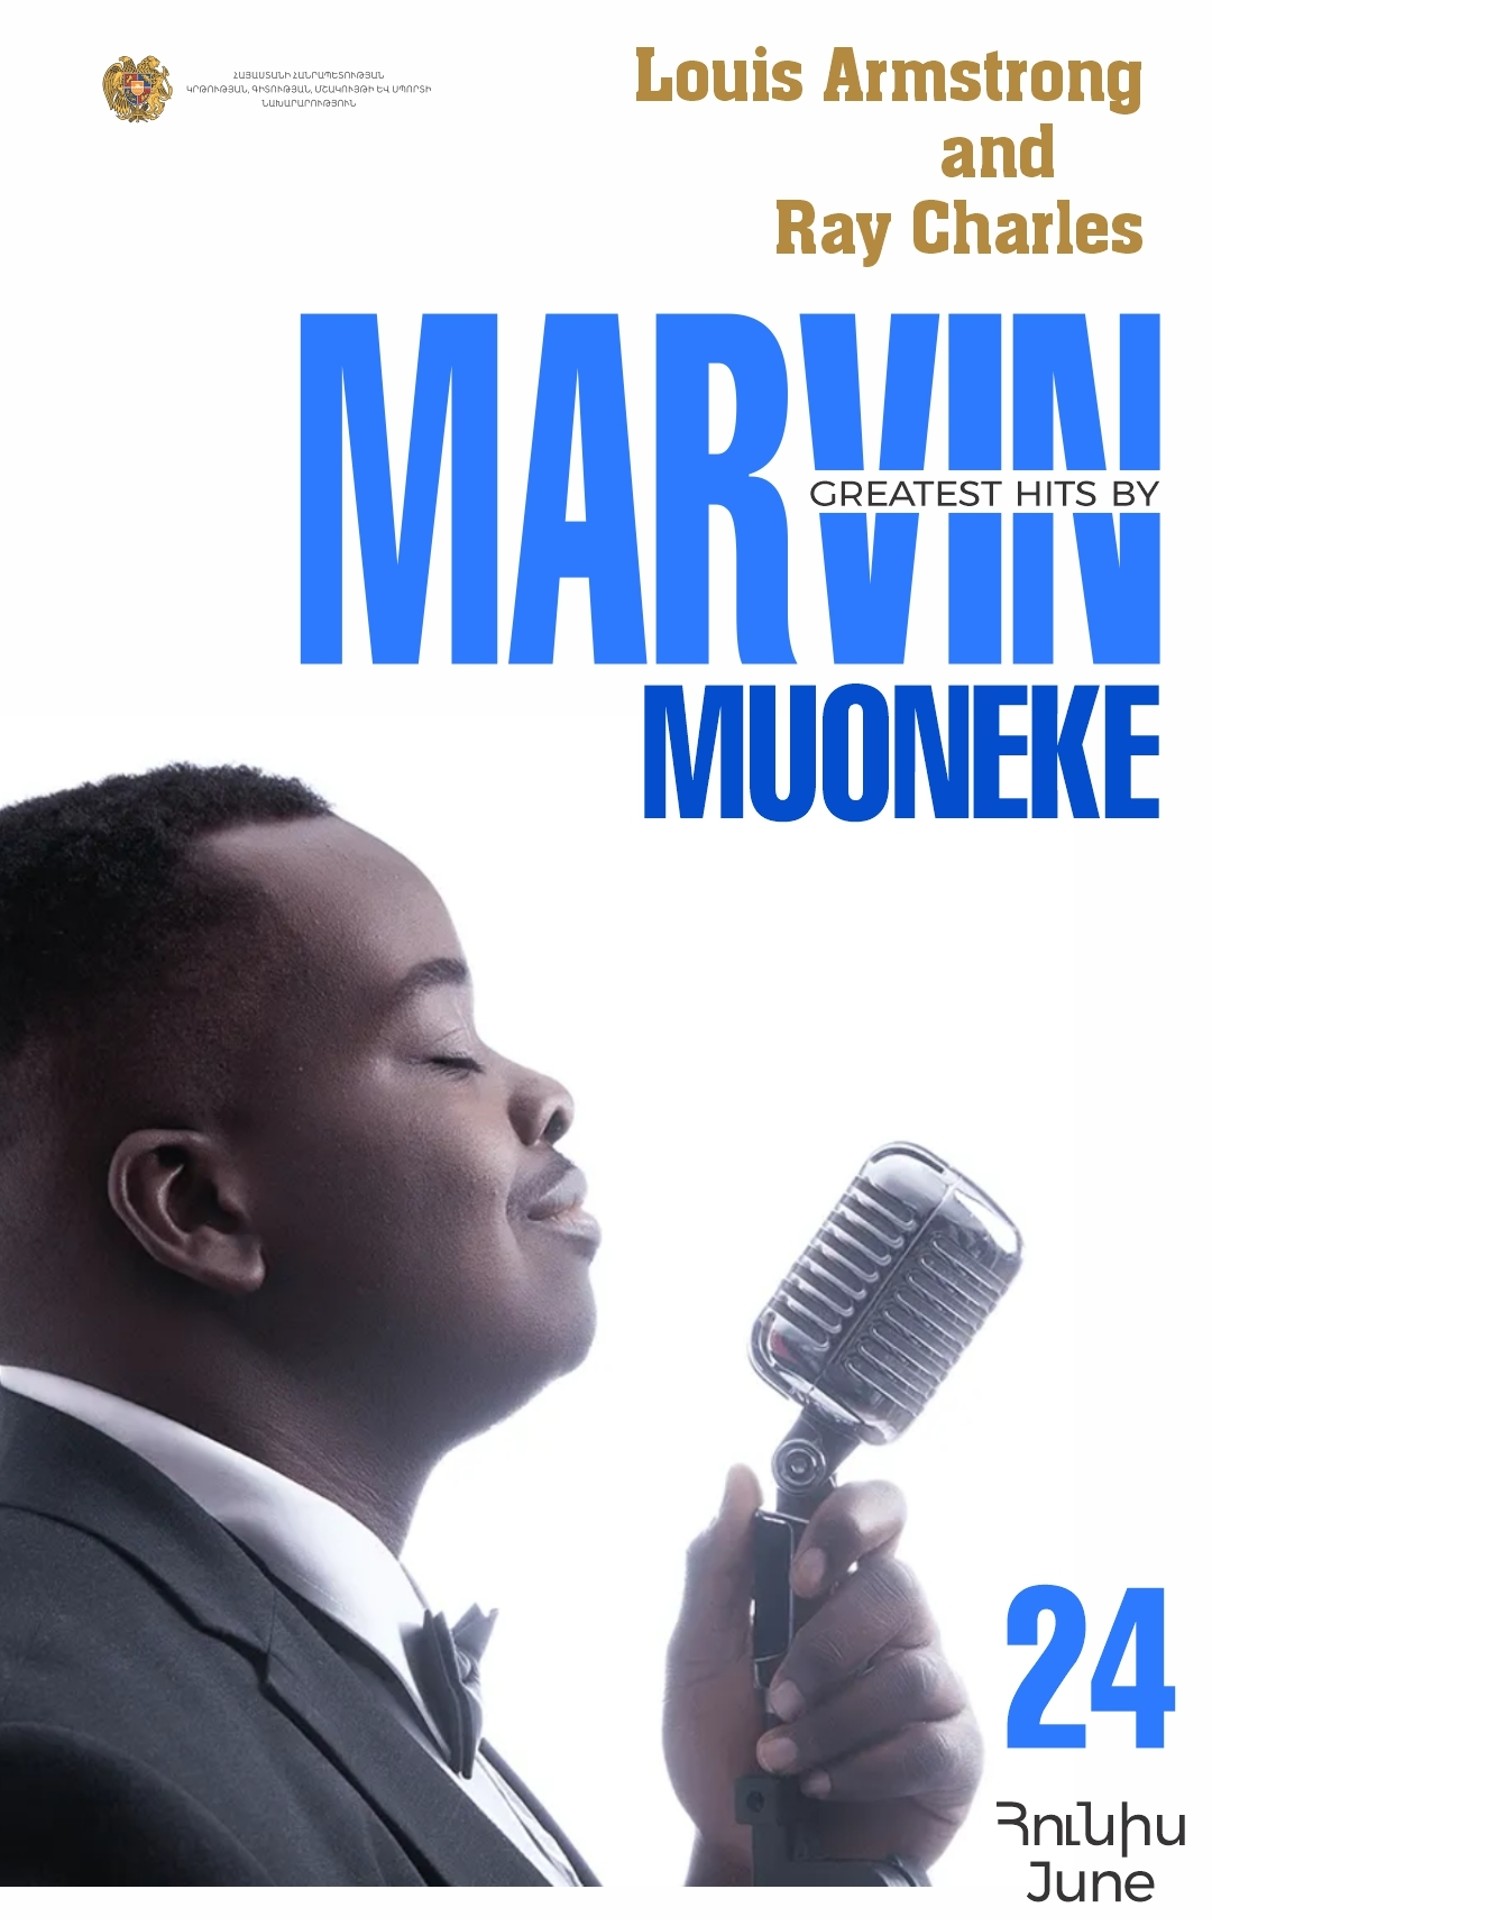 Marvin Muoneke | The greatest hits of Louis Armstrong and Ray Charles